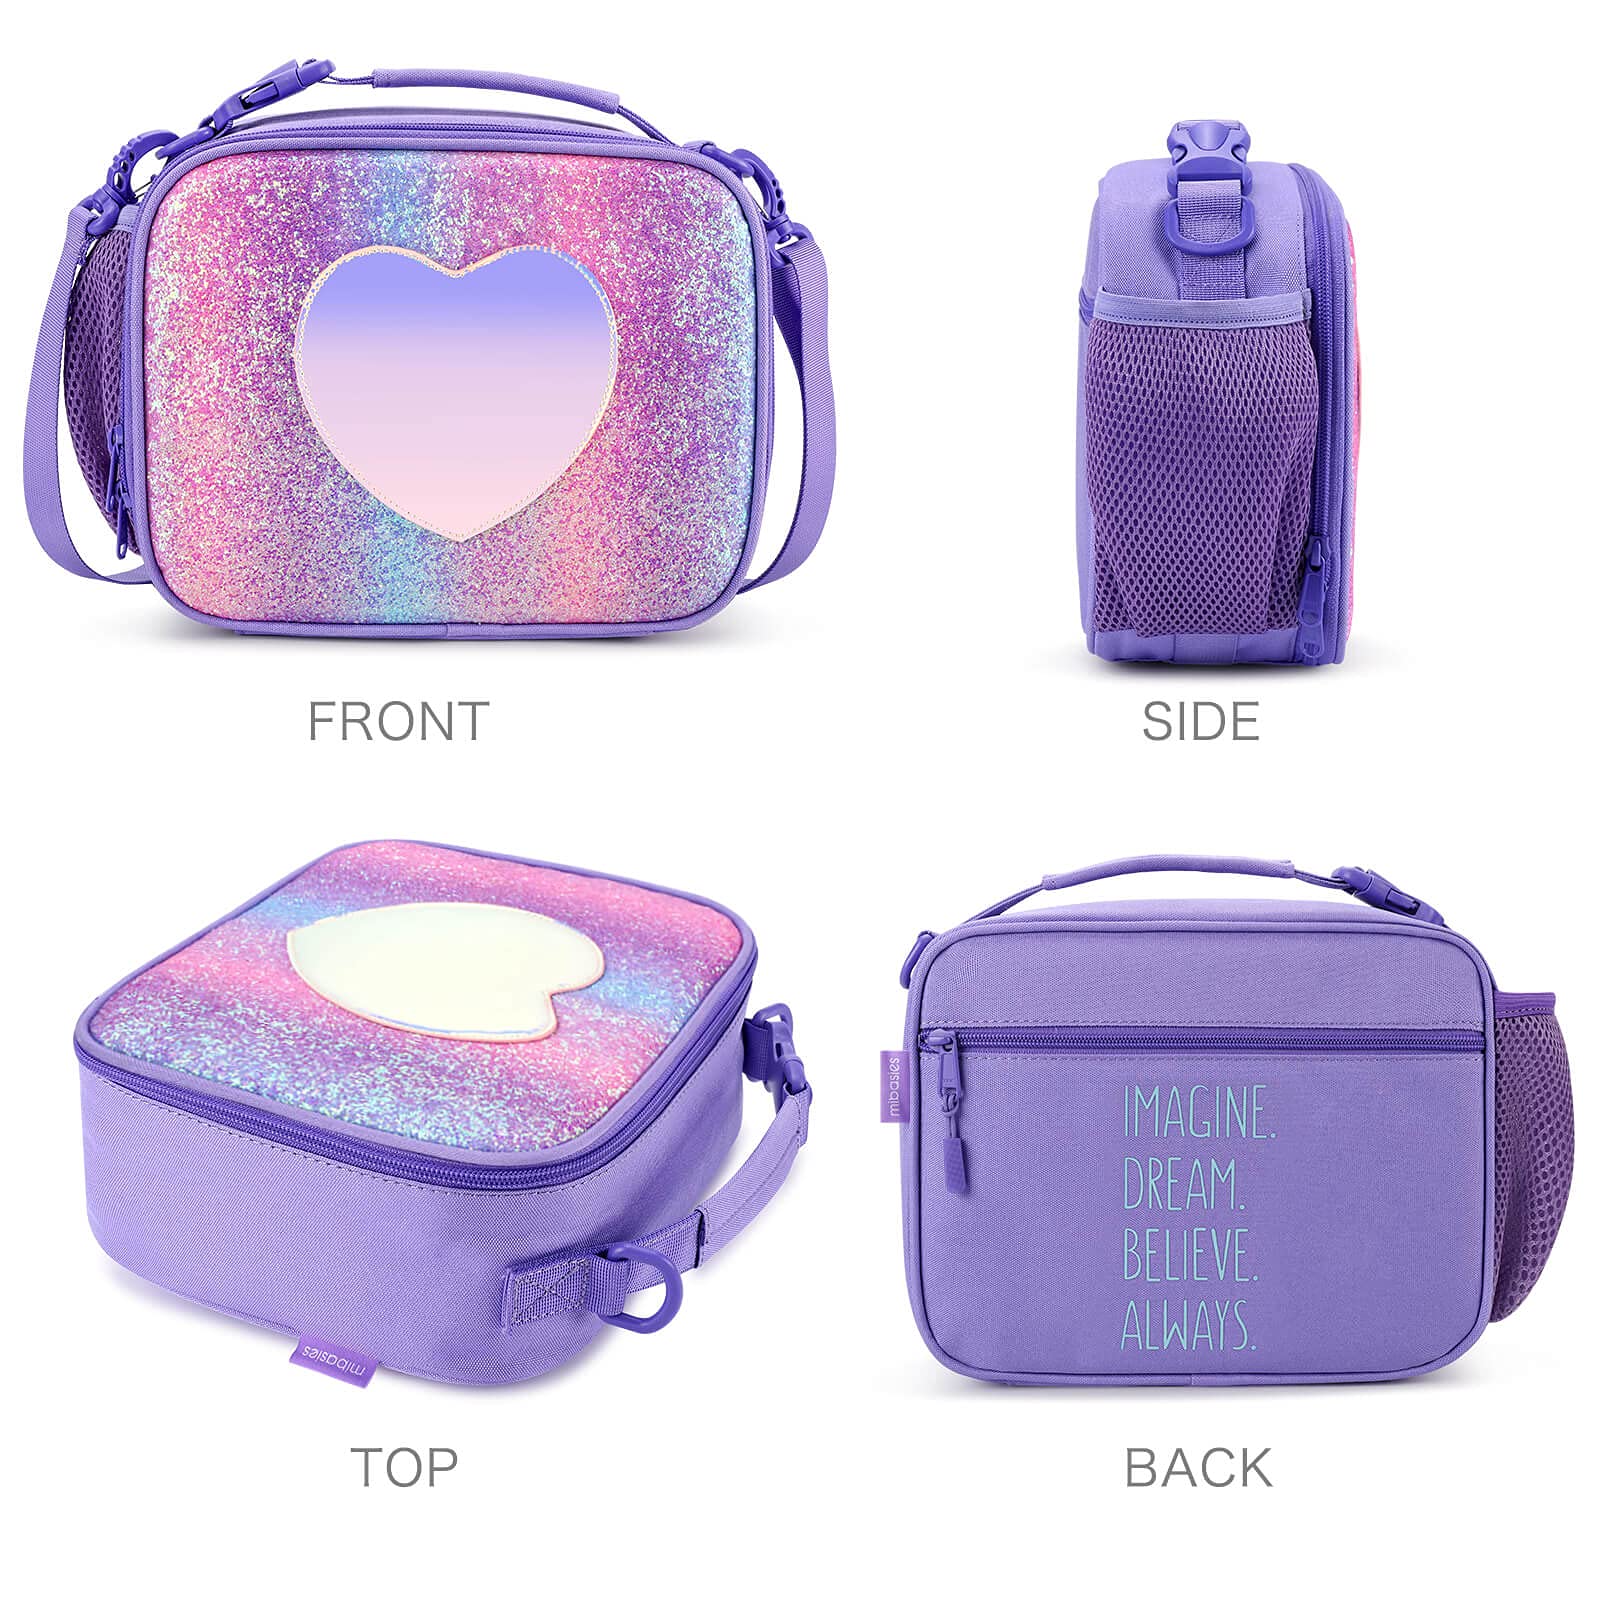 LUNCH BOX FOR GIRLS – mibasies